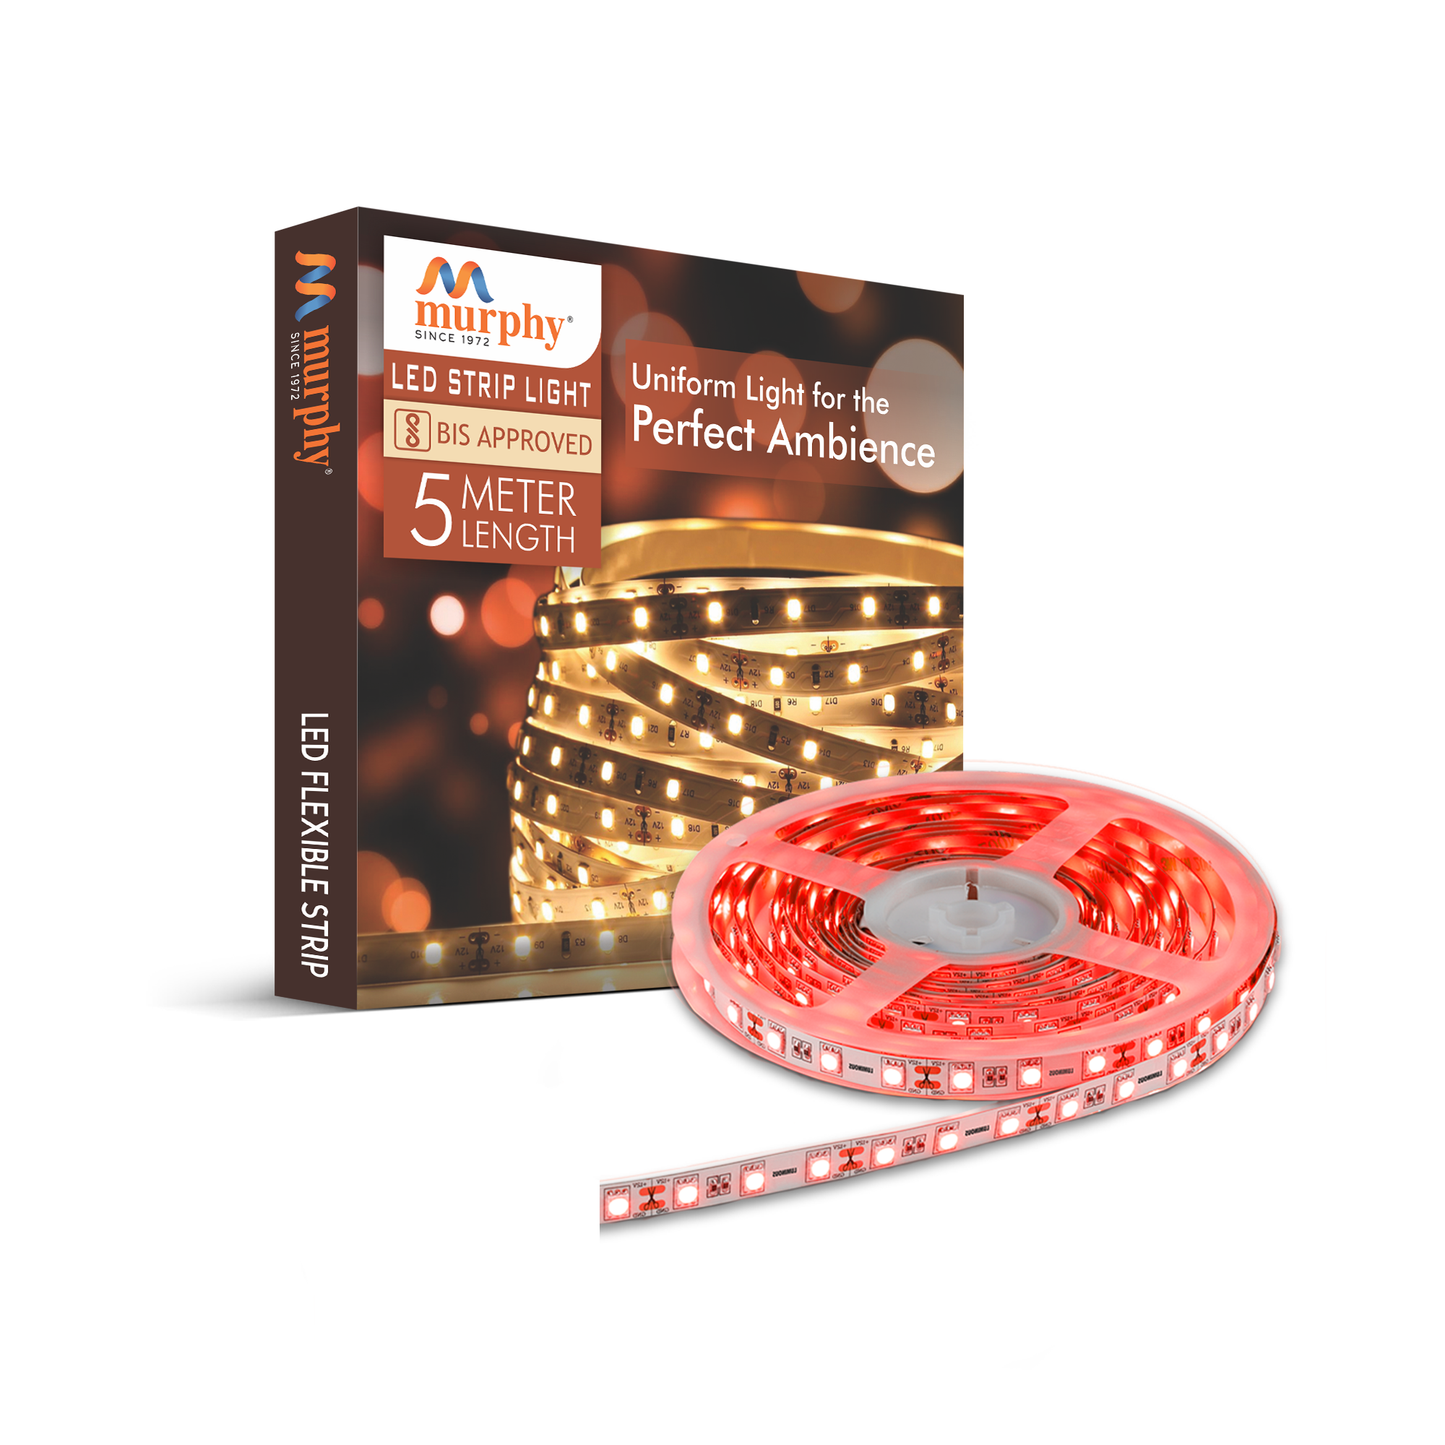 LED STRIP LIGHT 60 LED/Mtr. WITH DRIVER